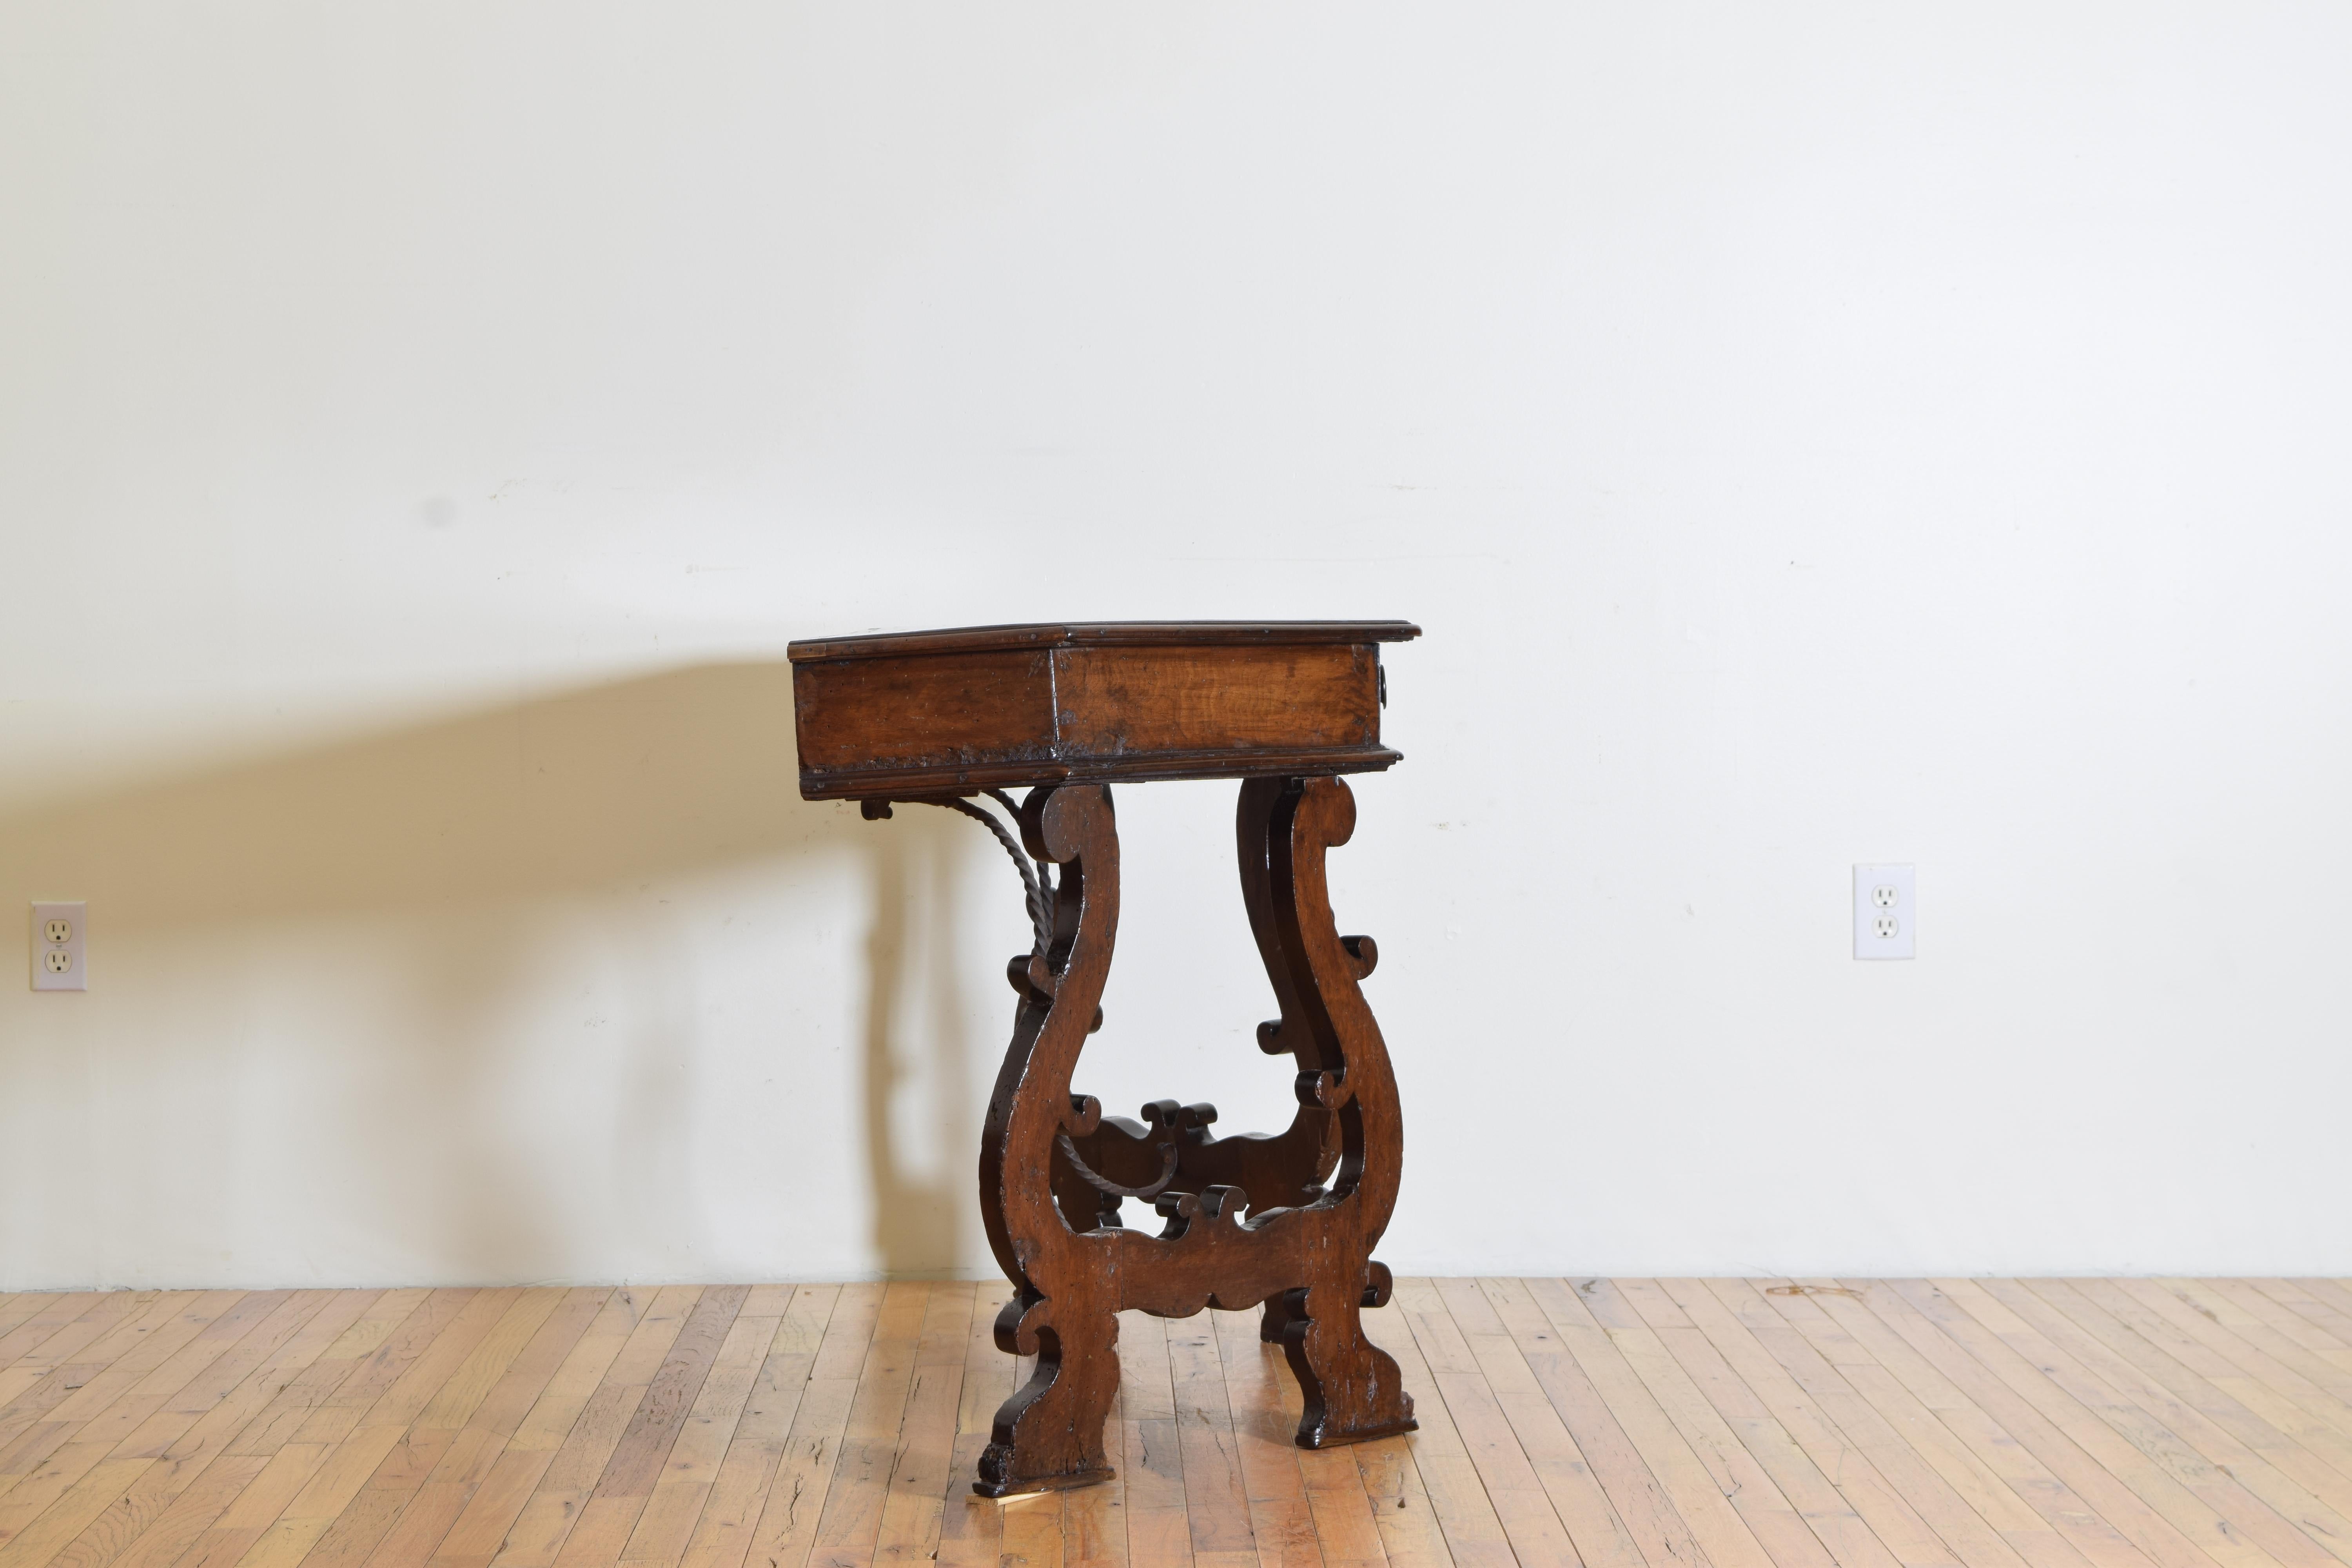 Hand-Carved 17th Century Italian Trestle Form Walnut Scantonata Console with One Drawer